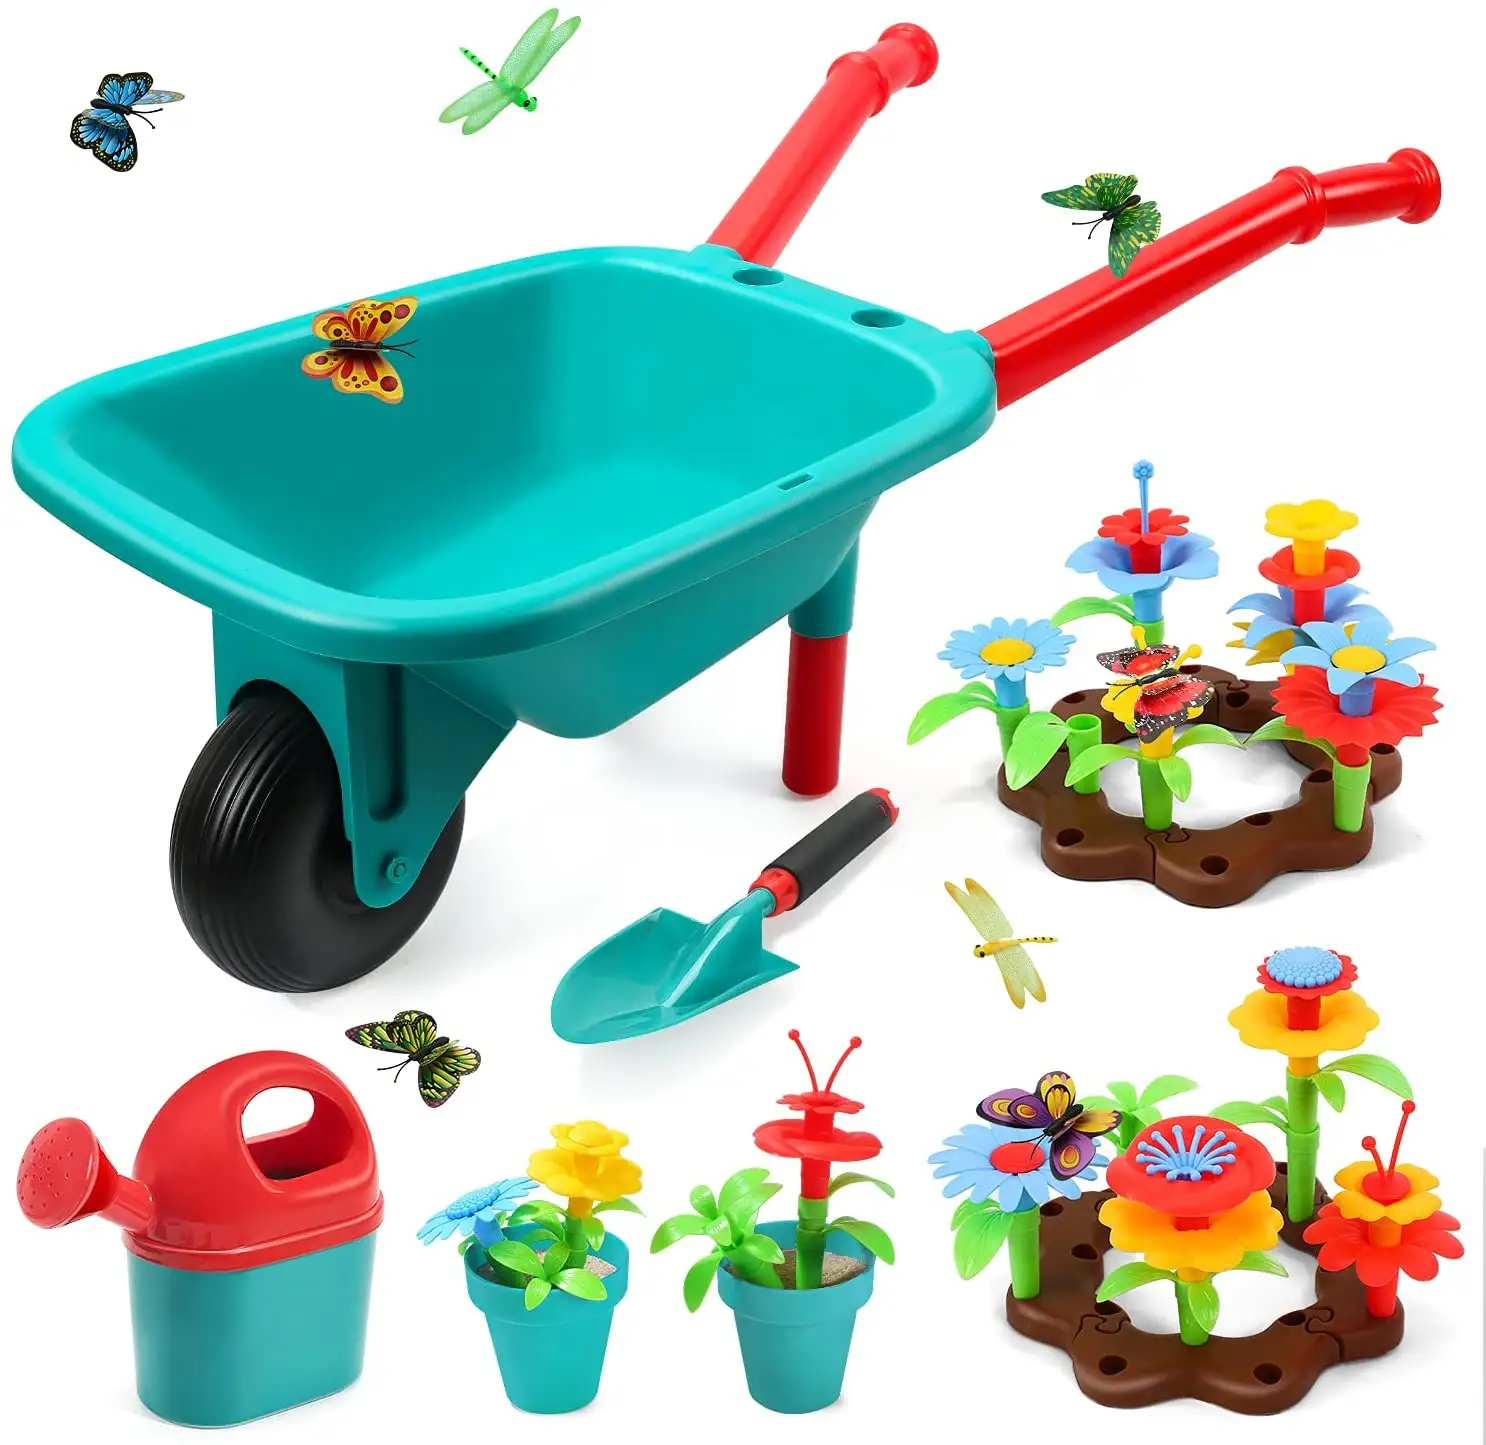 Cute Stone Outdoor Gardening Toys with Watering Can & Wheelbarrow Children Pretend Play Toy Garden Tool Set for Kids